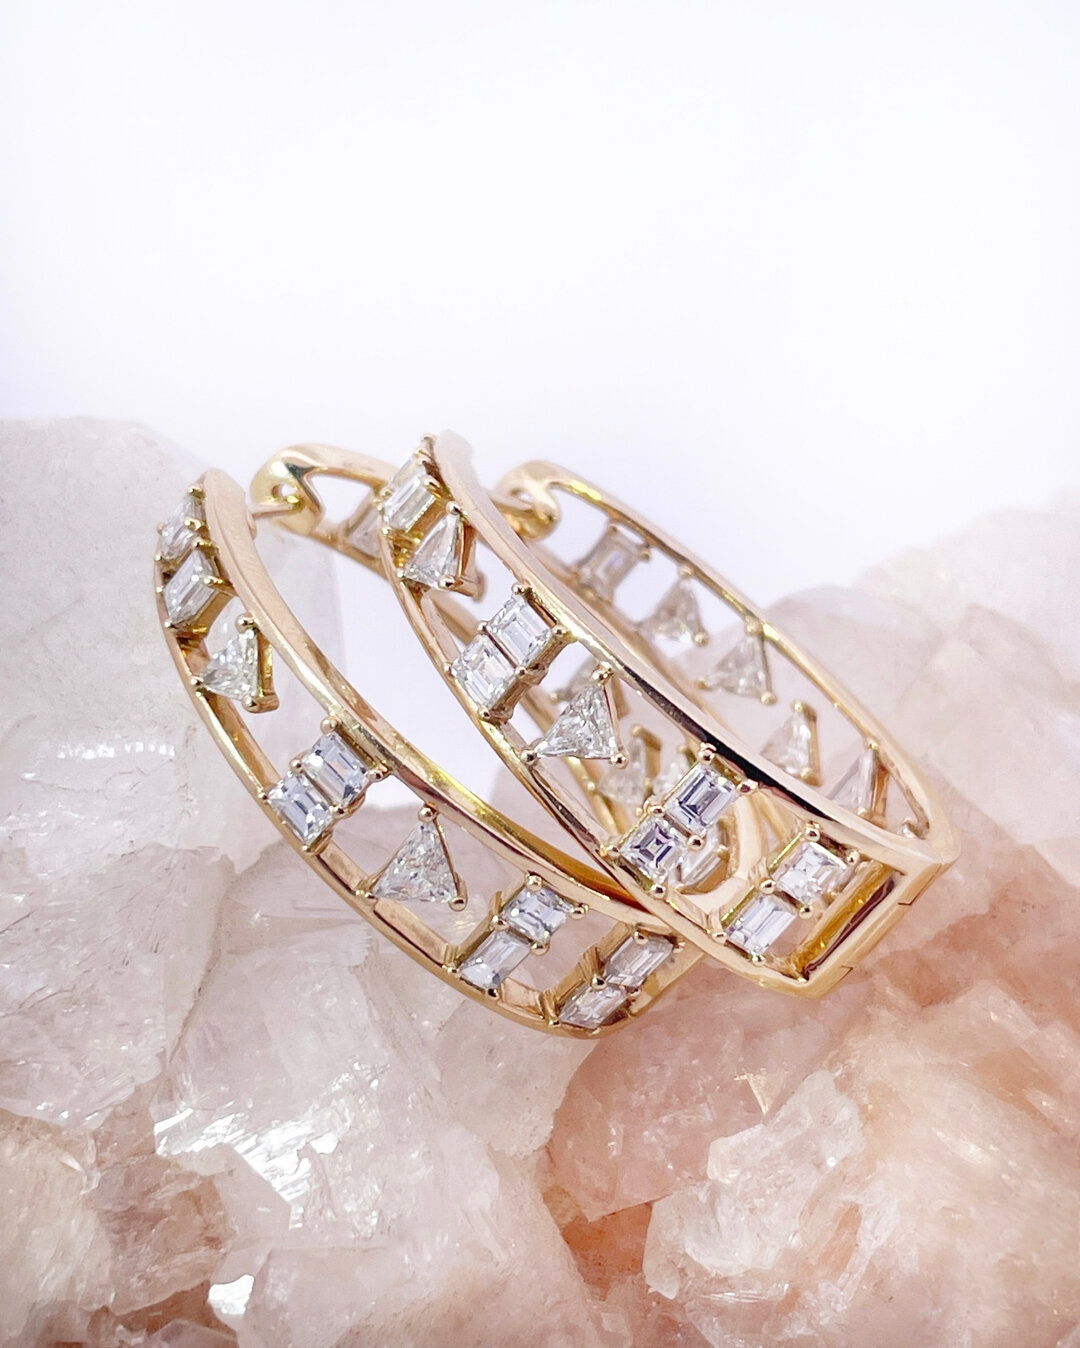 These unique hoop earrings are a perfect blend of luxurious design and avant-garde style. Featuring mixed shape diamonds set one and two at a time, these yellow gold beauties are set to stun. Equal parts elegant and eye-catching, these diamond hoops 